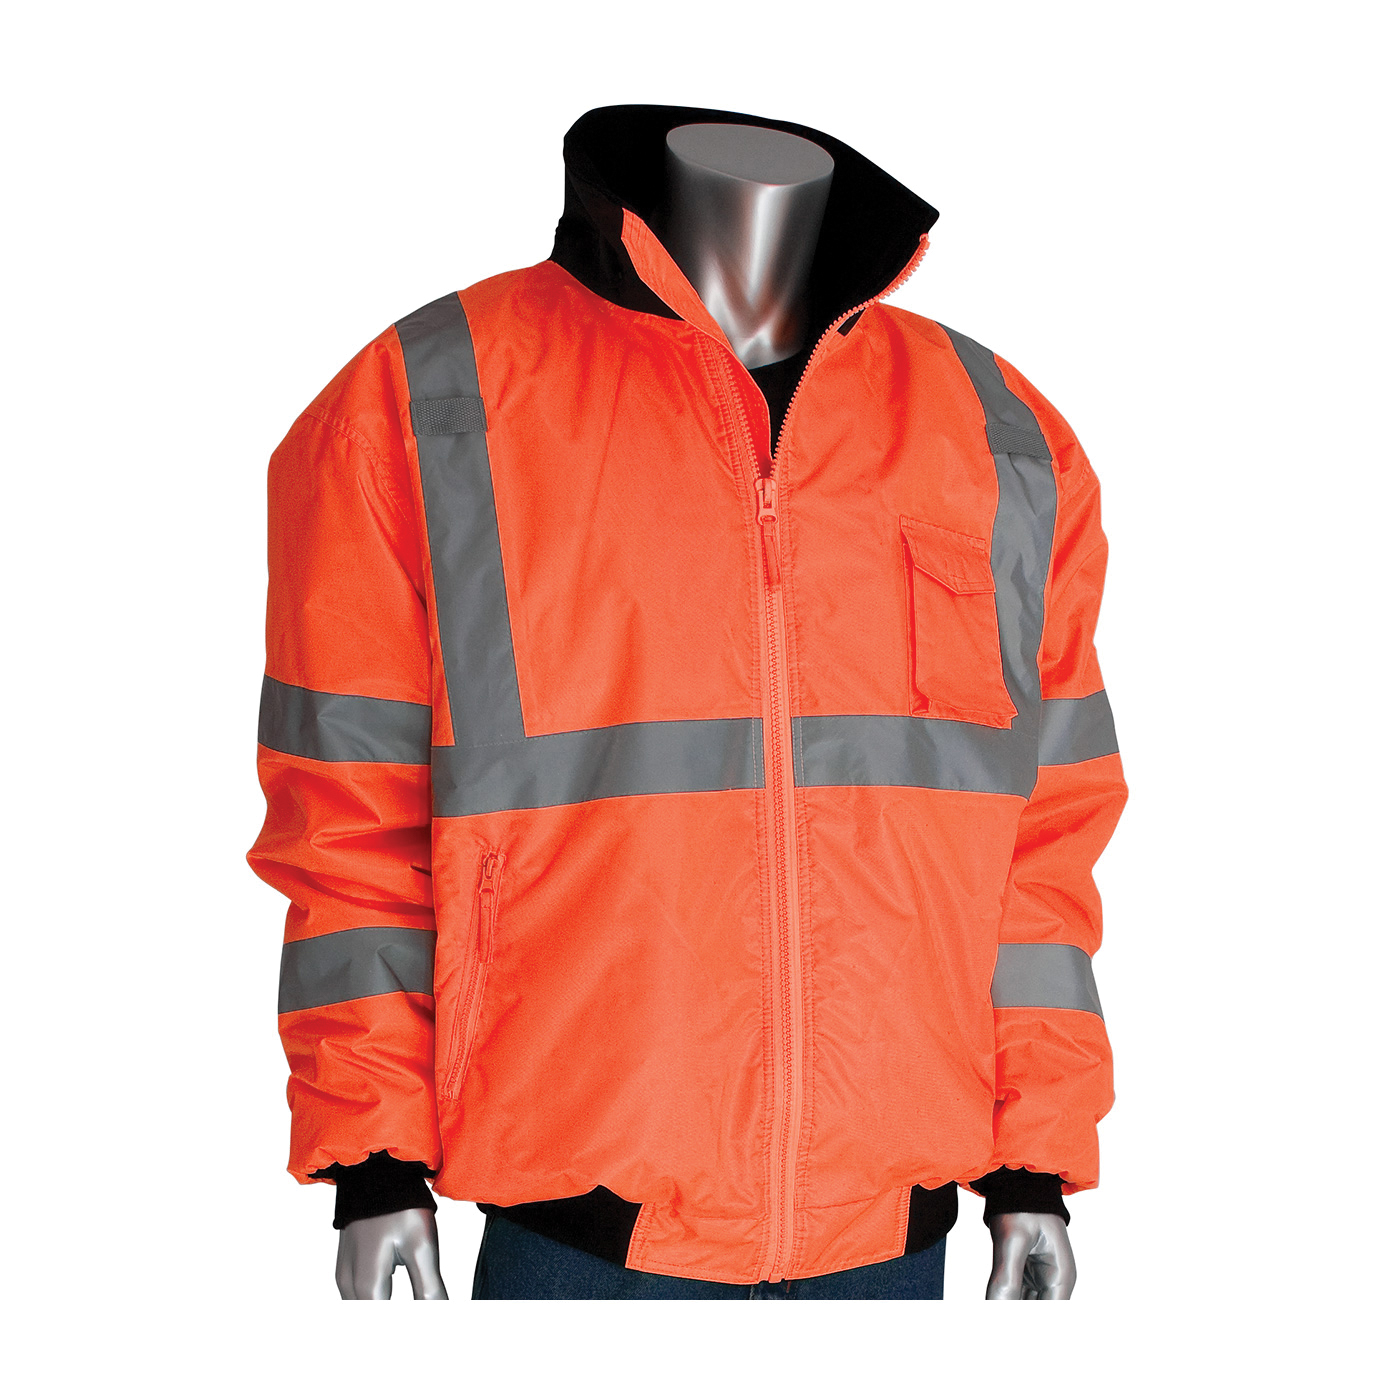 PIP® 333-1762-OR/M Bomber Jacket With Zip-Out Fleece Liner, Hi-Viz Lime Orange, Polyester, 54 in Chest, Resists: Water, Specifications Met: ANSI 107 Class 3 Type R